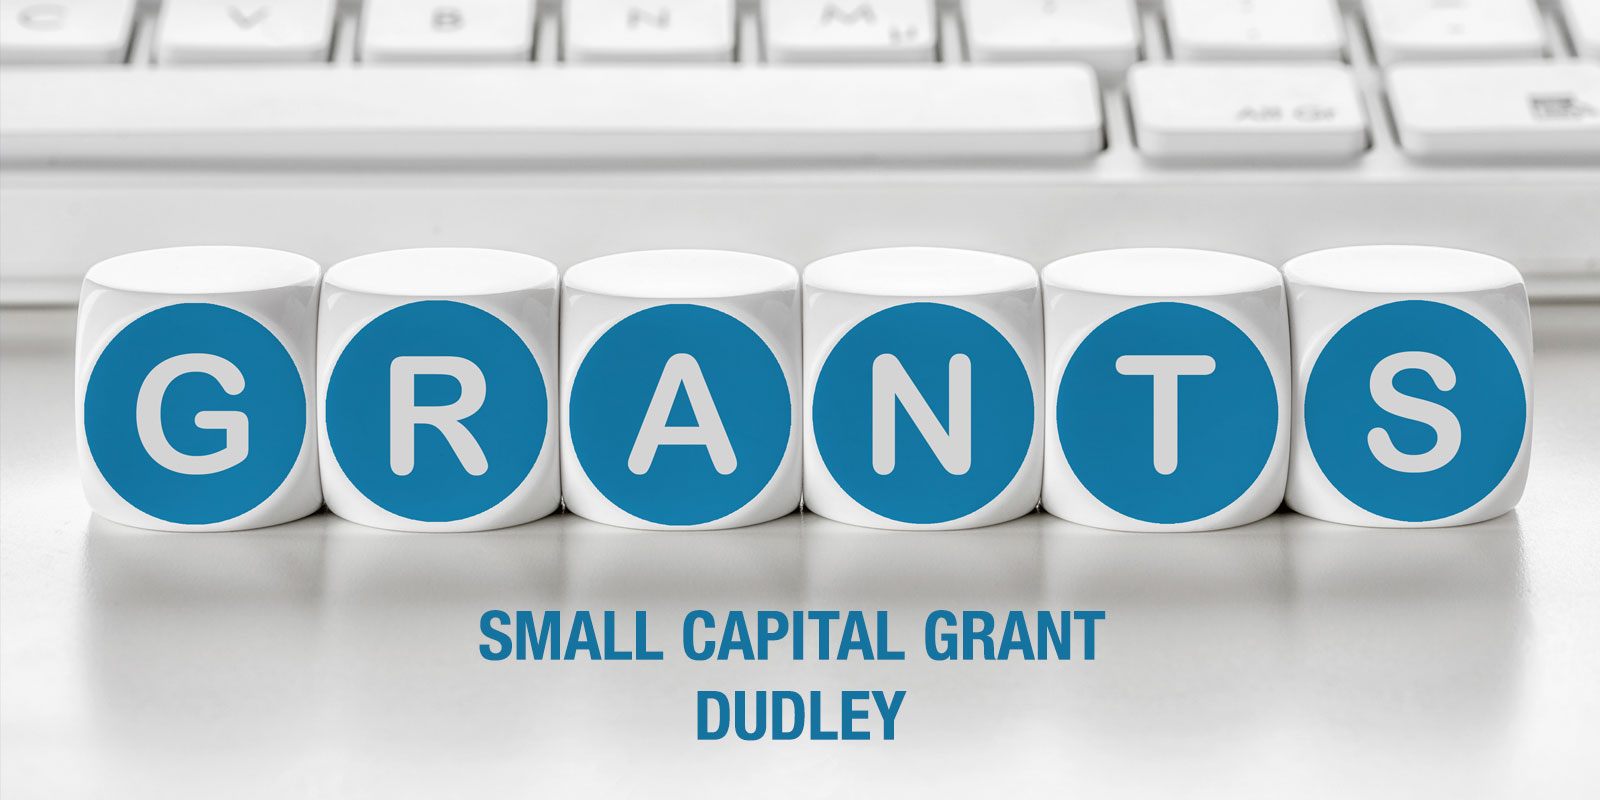 Small Capital Grant - Dudley